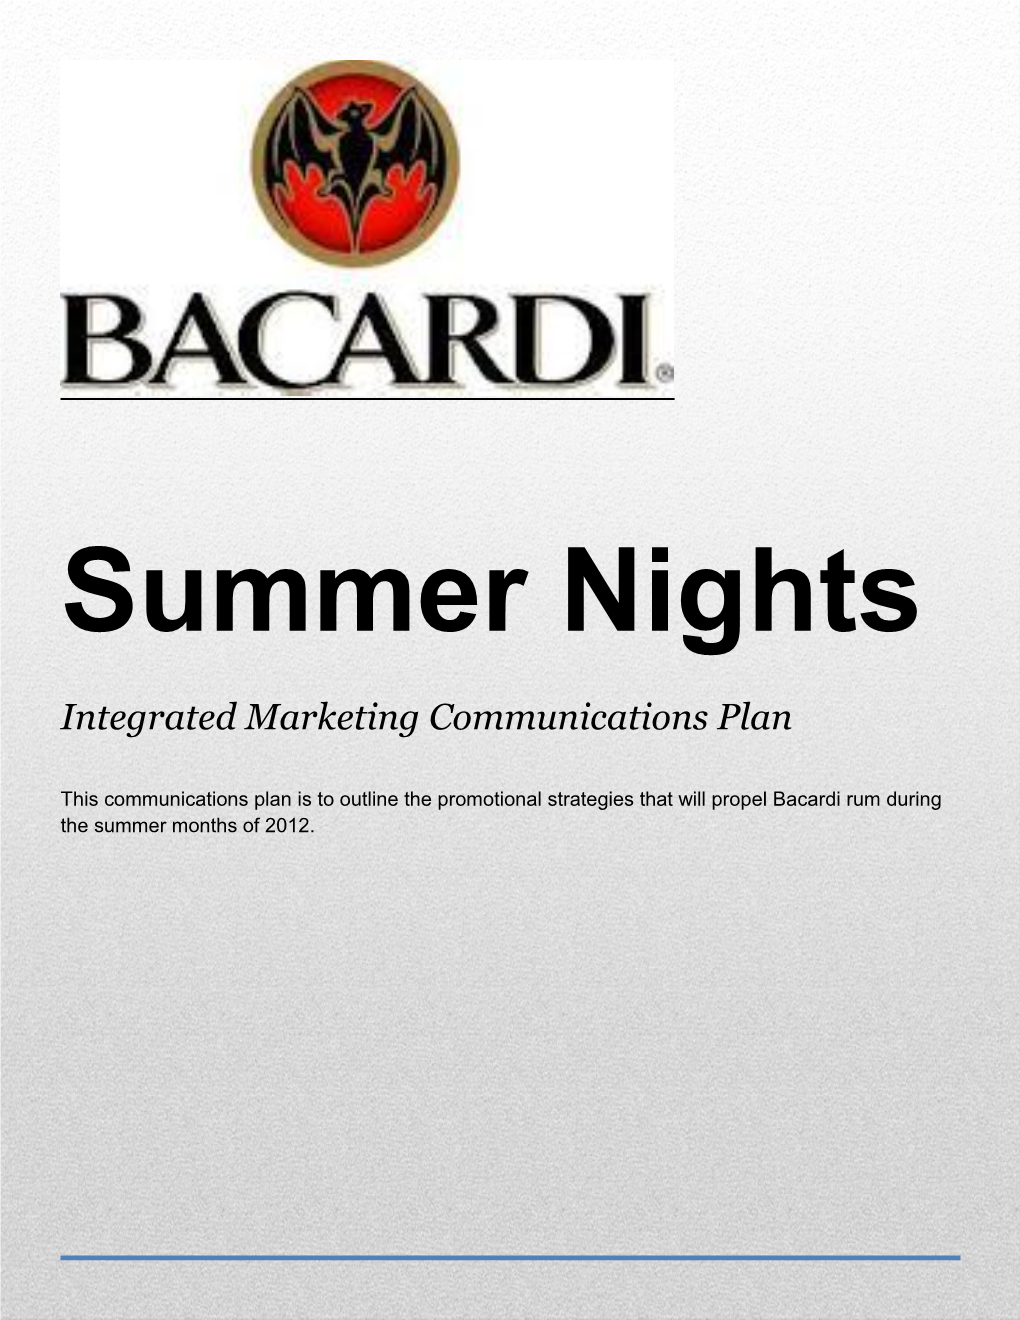 Bacardi Summer Nights Table of Contents